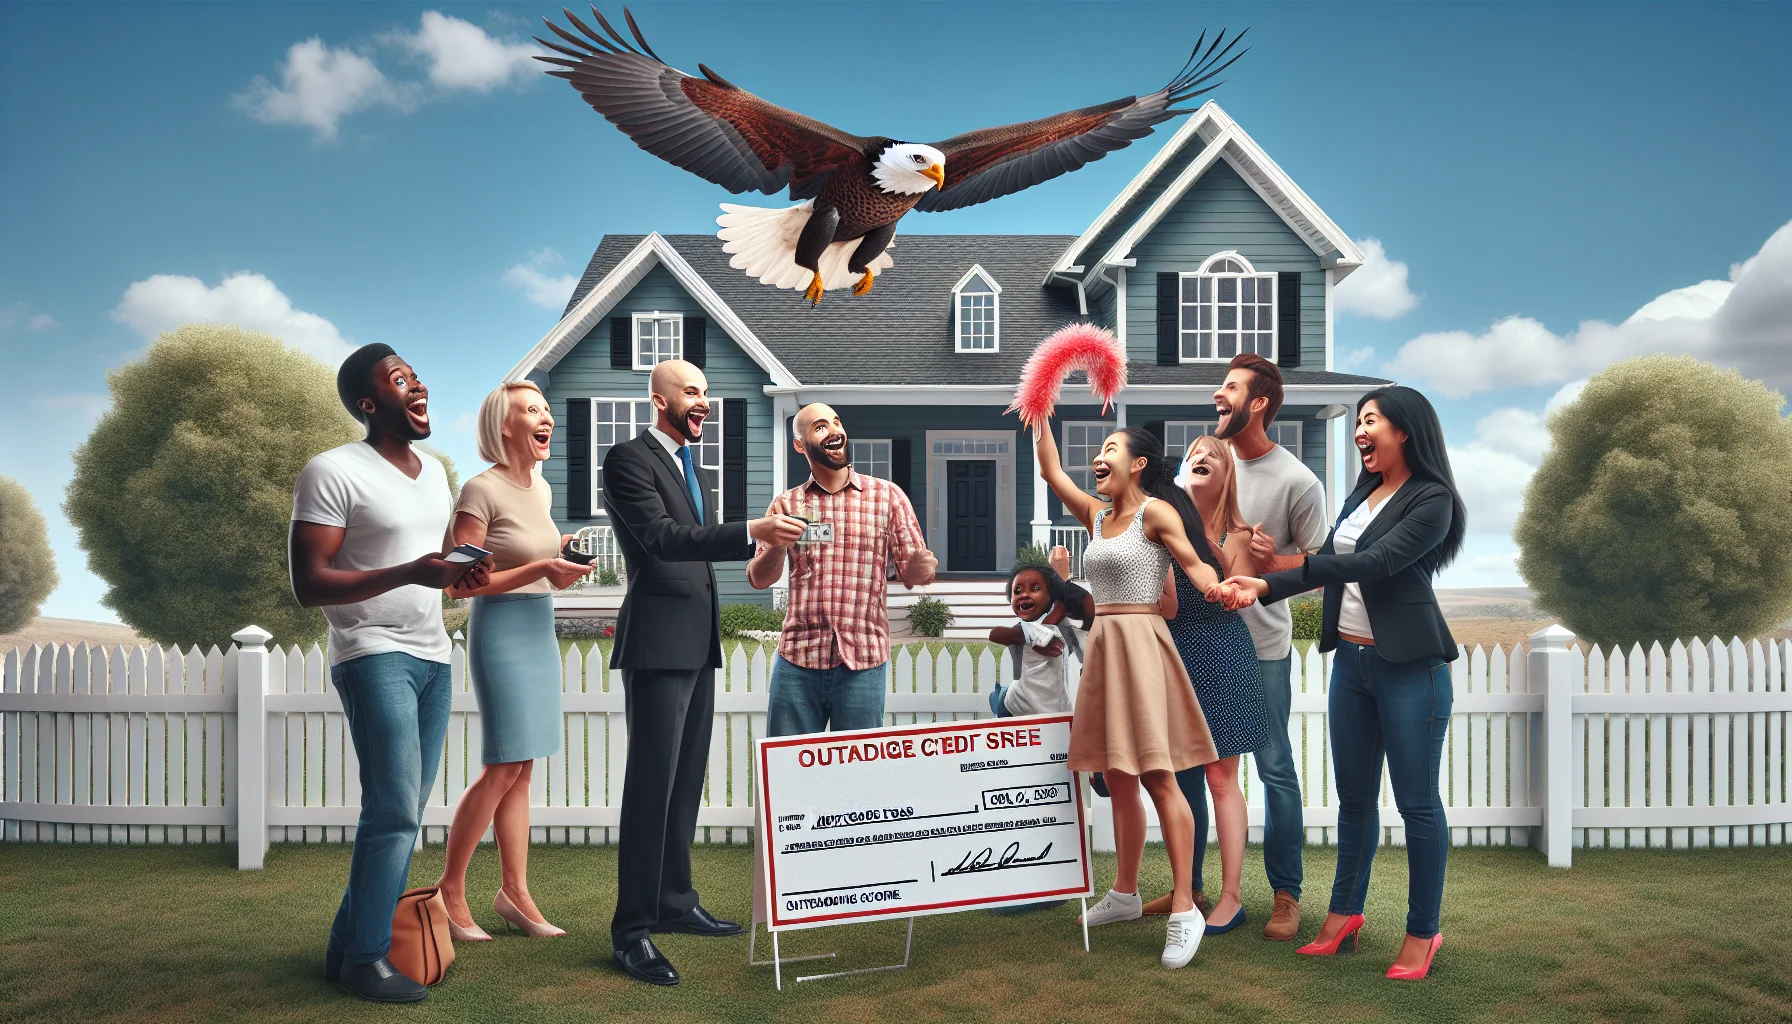 A humorous and realistic image showing a perfect scenario for home loans in the United States. It features a diverse range of adults (Hispanic woman, Black man, Caucasian man, Middle-Eastern woman) with joyful and surprised expressions as they inspect a luxurious white picket fence house with a red mortgage free sign in the lawn. A bald eagle soars across a blue sky overhead, a symbol of American freedom. Meanwhile, a real estate agent, a South Asian woman, hands over the house keys to the group, overjoyed. Include a comedic oversized cheque with the text 'Outstanding Credit Score'. The whole scene unfold in a friendly neighborhood.